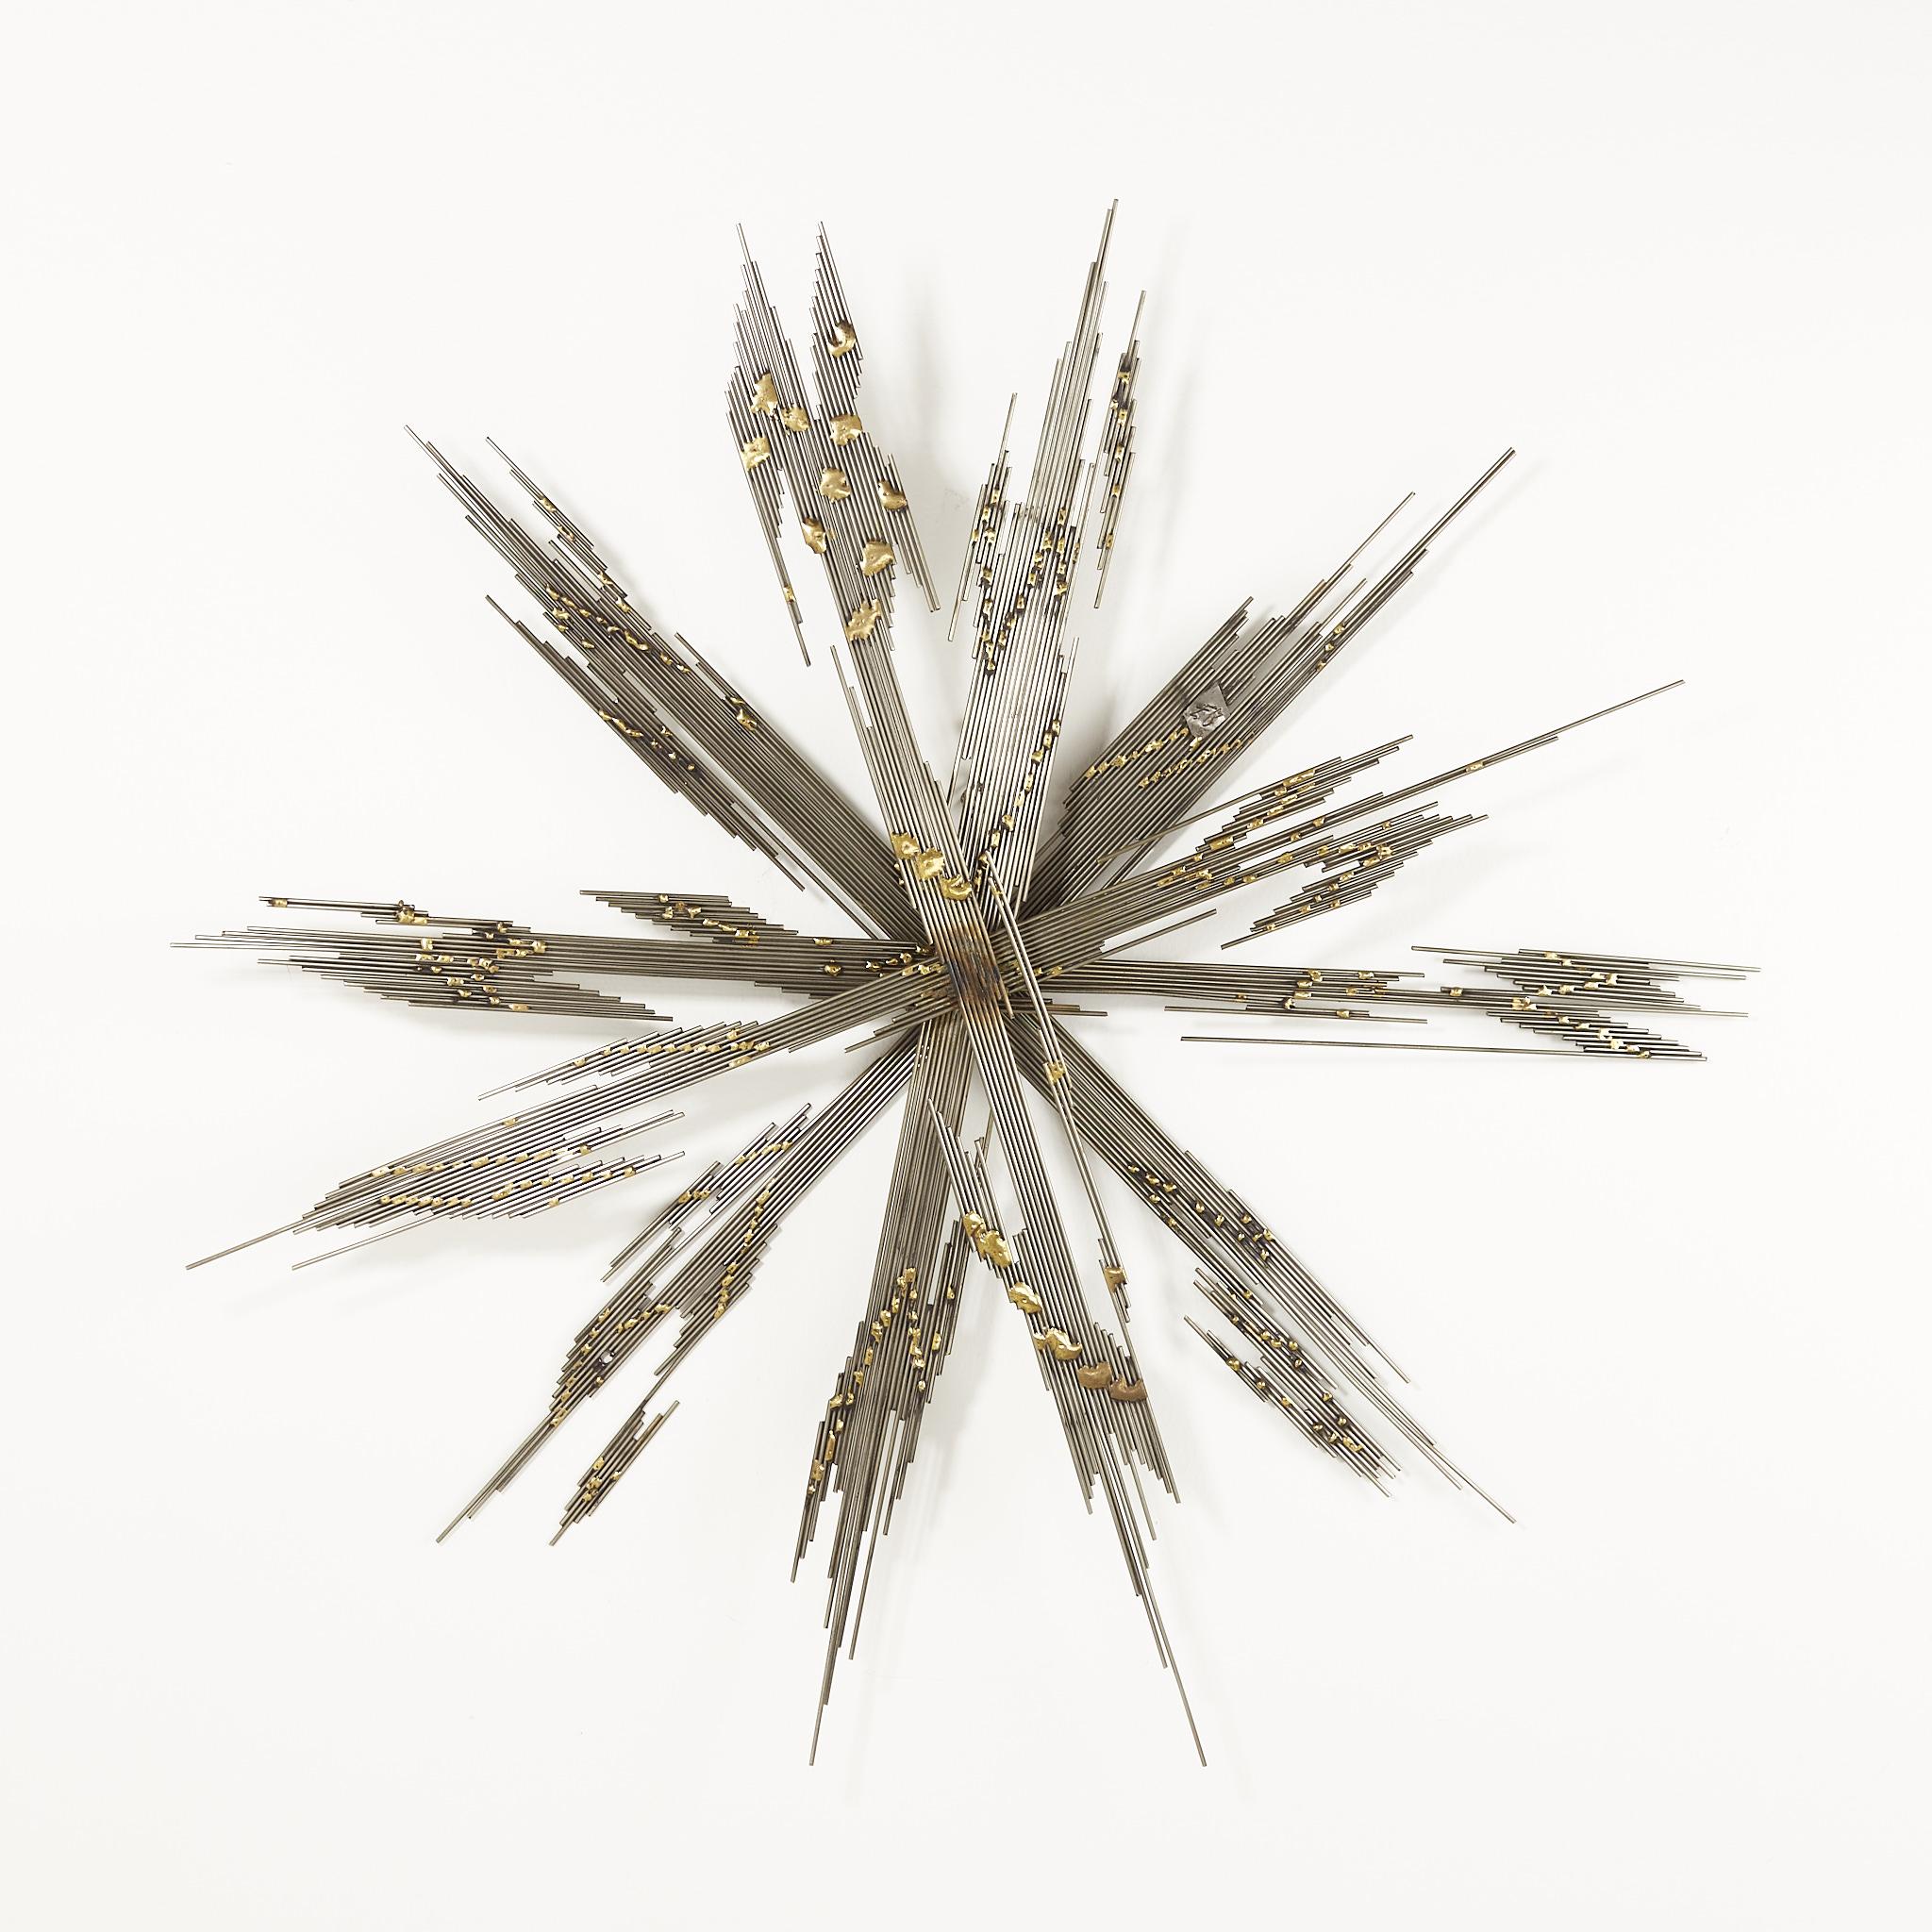 Curtis Jere style mid century steel and brass starburst wall art

This art piece measures: 36 wide x 3.5 deep x 36 inches high

This art piece is in excellent vintage condition.

We take our photos in a controlled lighting studio to show as